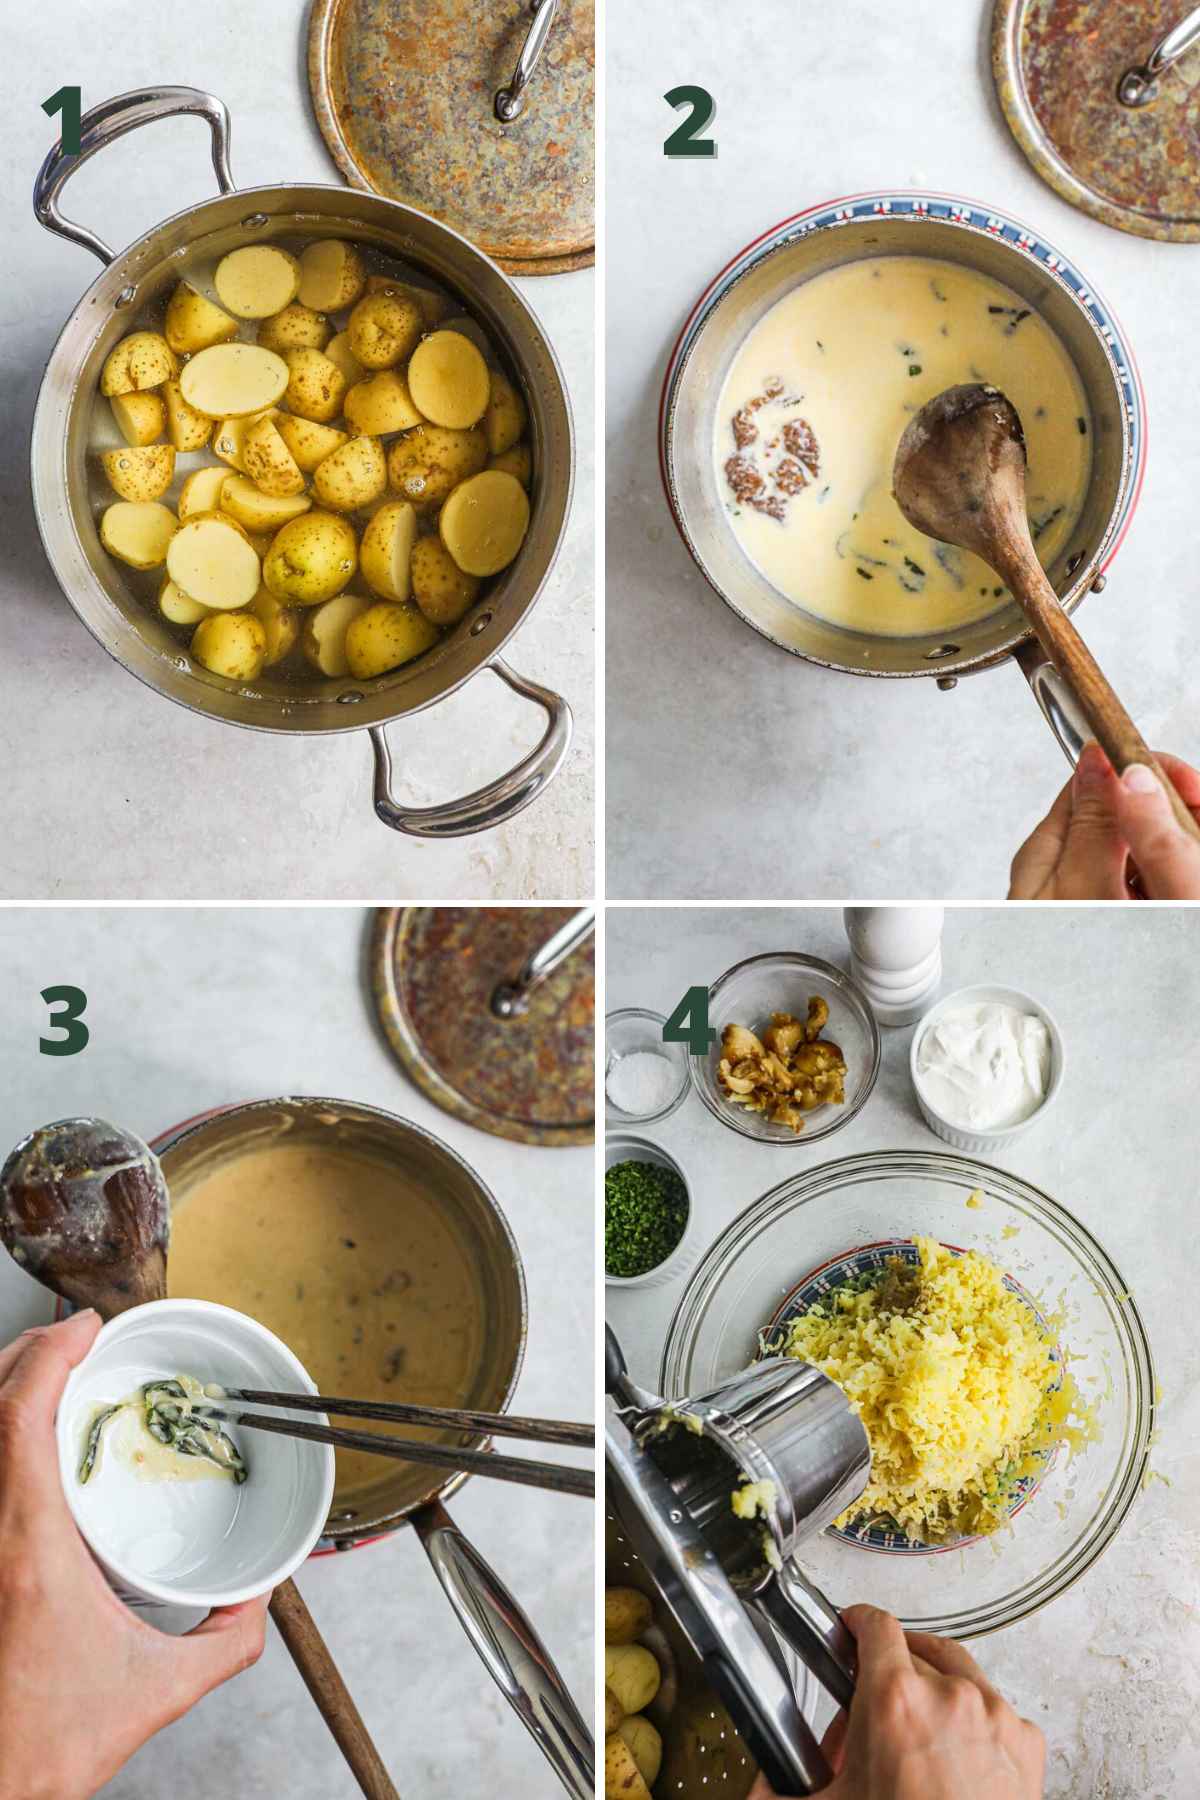 Steps to make miso mashed potatoes, boil potatoes; cook heavy cream, miso paste, garlic sage leaves in saucepan; remove sage leaves; rice or mash potatoes.